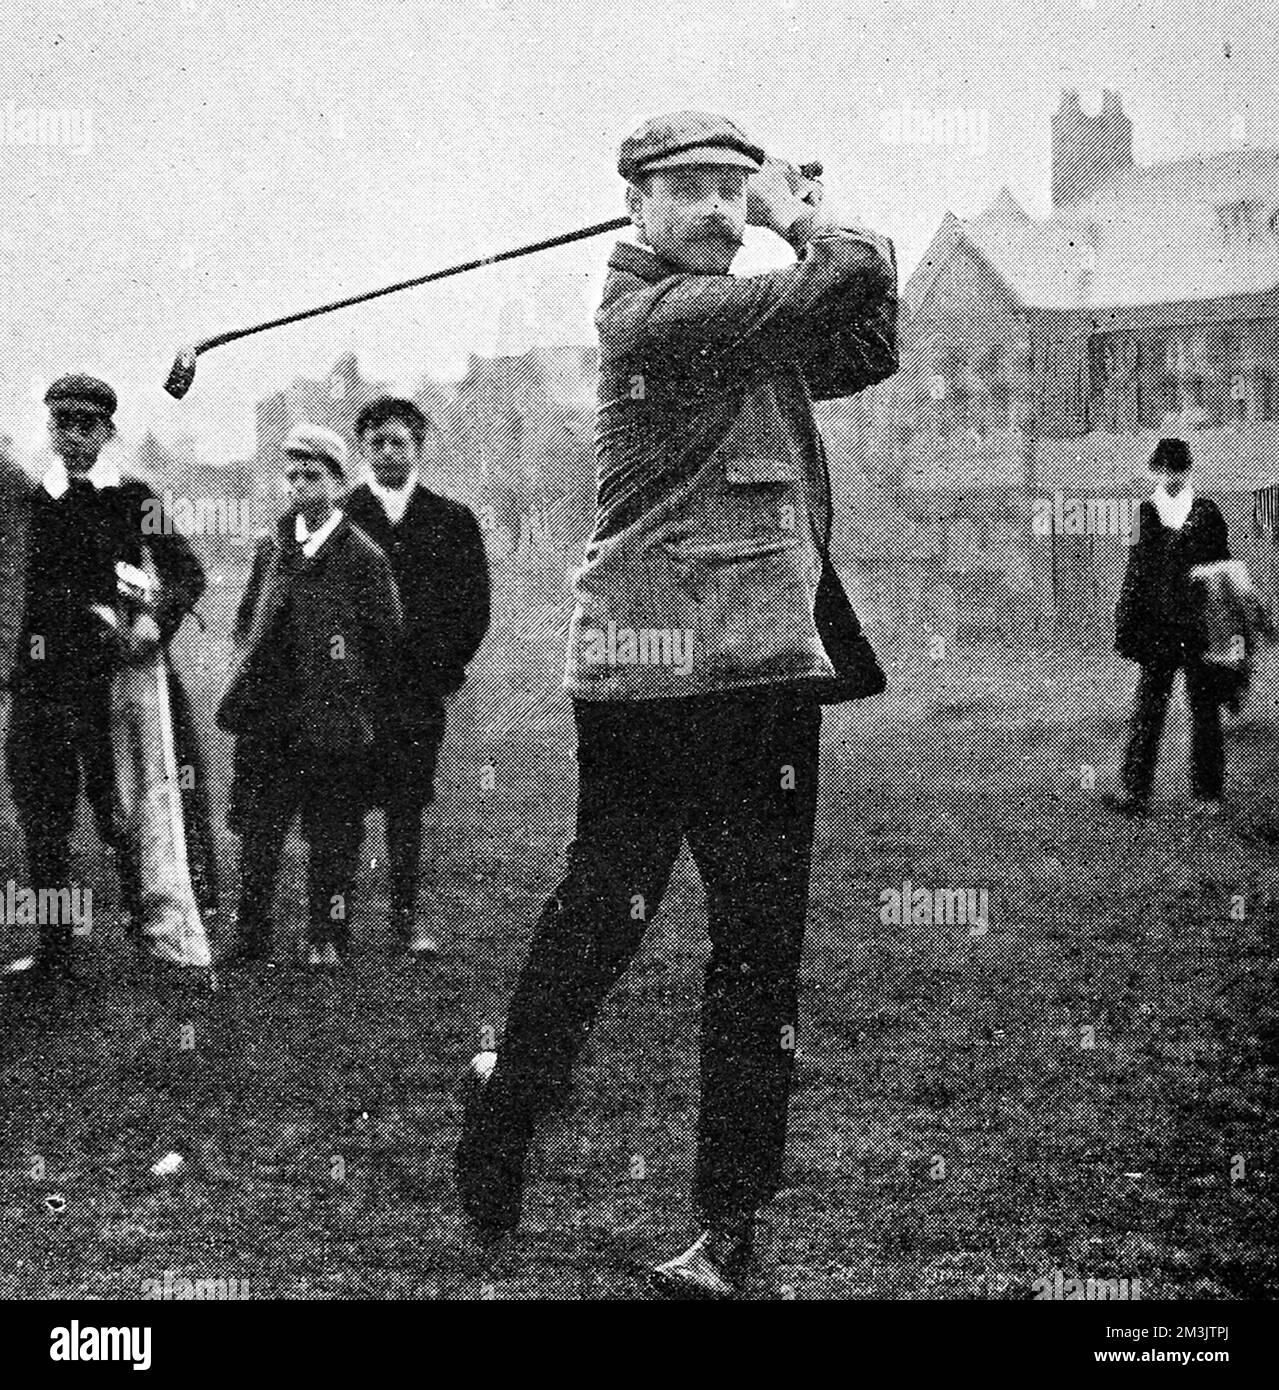 Photograph of James Robb, winner of the Golf Amateur Championship at Hoylake, May 1906.  Mr. Robb, of Prestwick, St. Nicholas, beat Mr. C.C. Lingen, of Sunningdale, by 4 and 3 despite strong wind and rain during their tie.     Date: 1906 Stock Photo